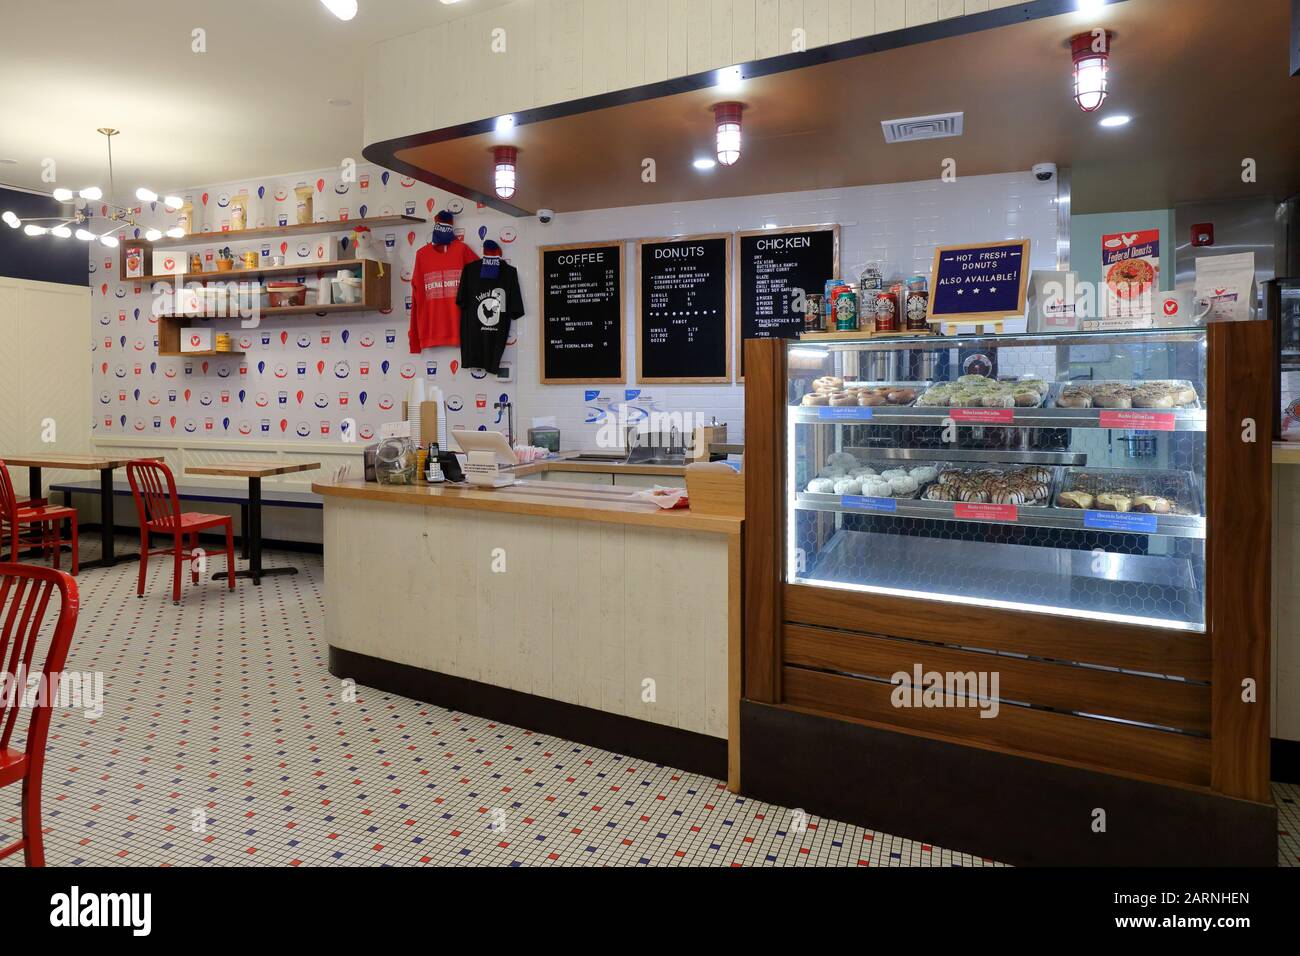 Federal Donuts, 540 South St, Philadelphia, PA. interior of a coffee shop serving fried chicken and cake donuts in Queens Village. Stock Photo